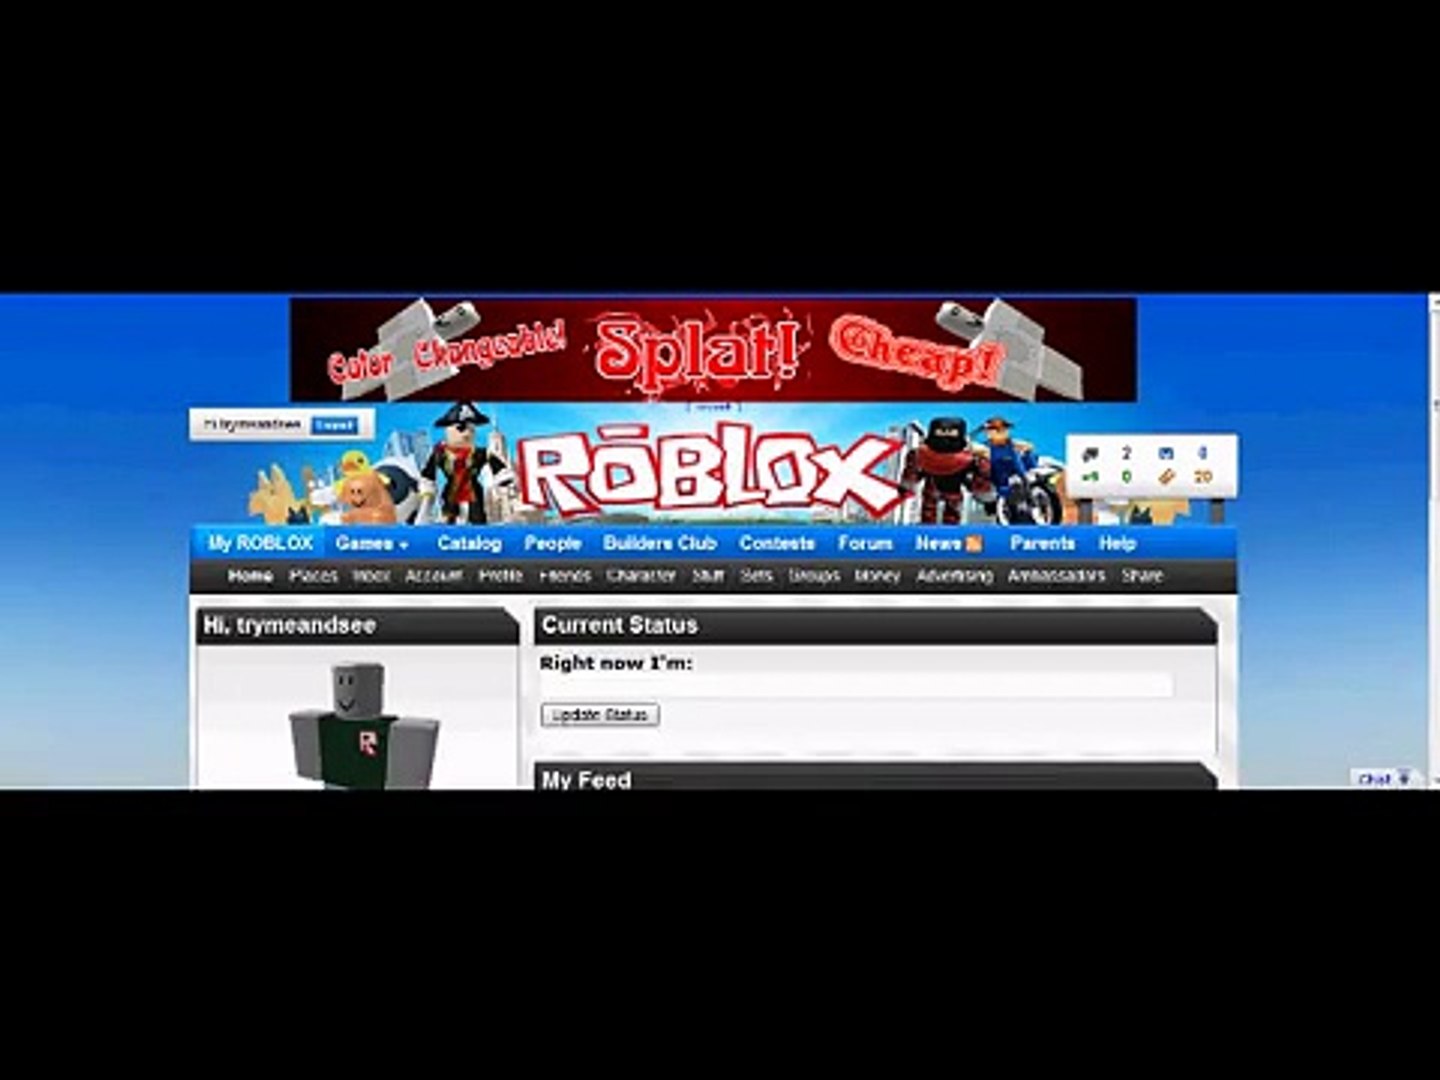 Cheating In Roblox 2 Lego Auto Clicker In Roblox Youtubers Things How To Get Free Robux - bye lena problems roblox id roblox cheat auto clicker